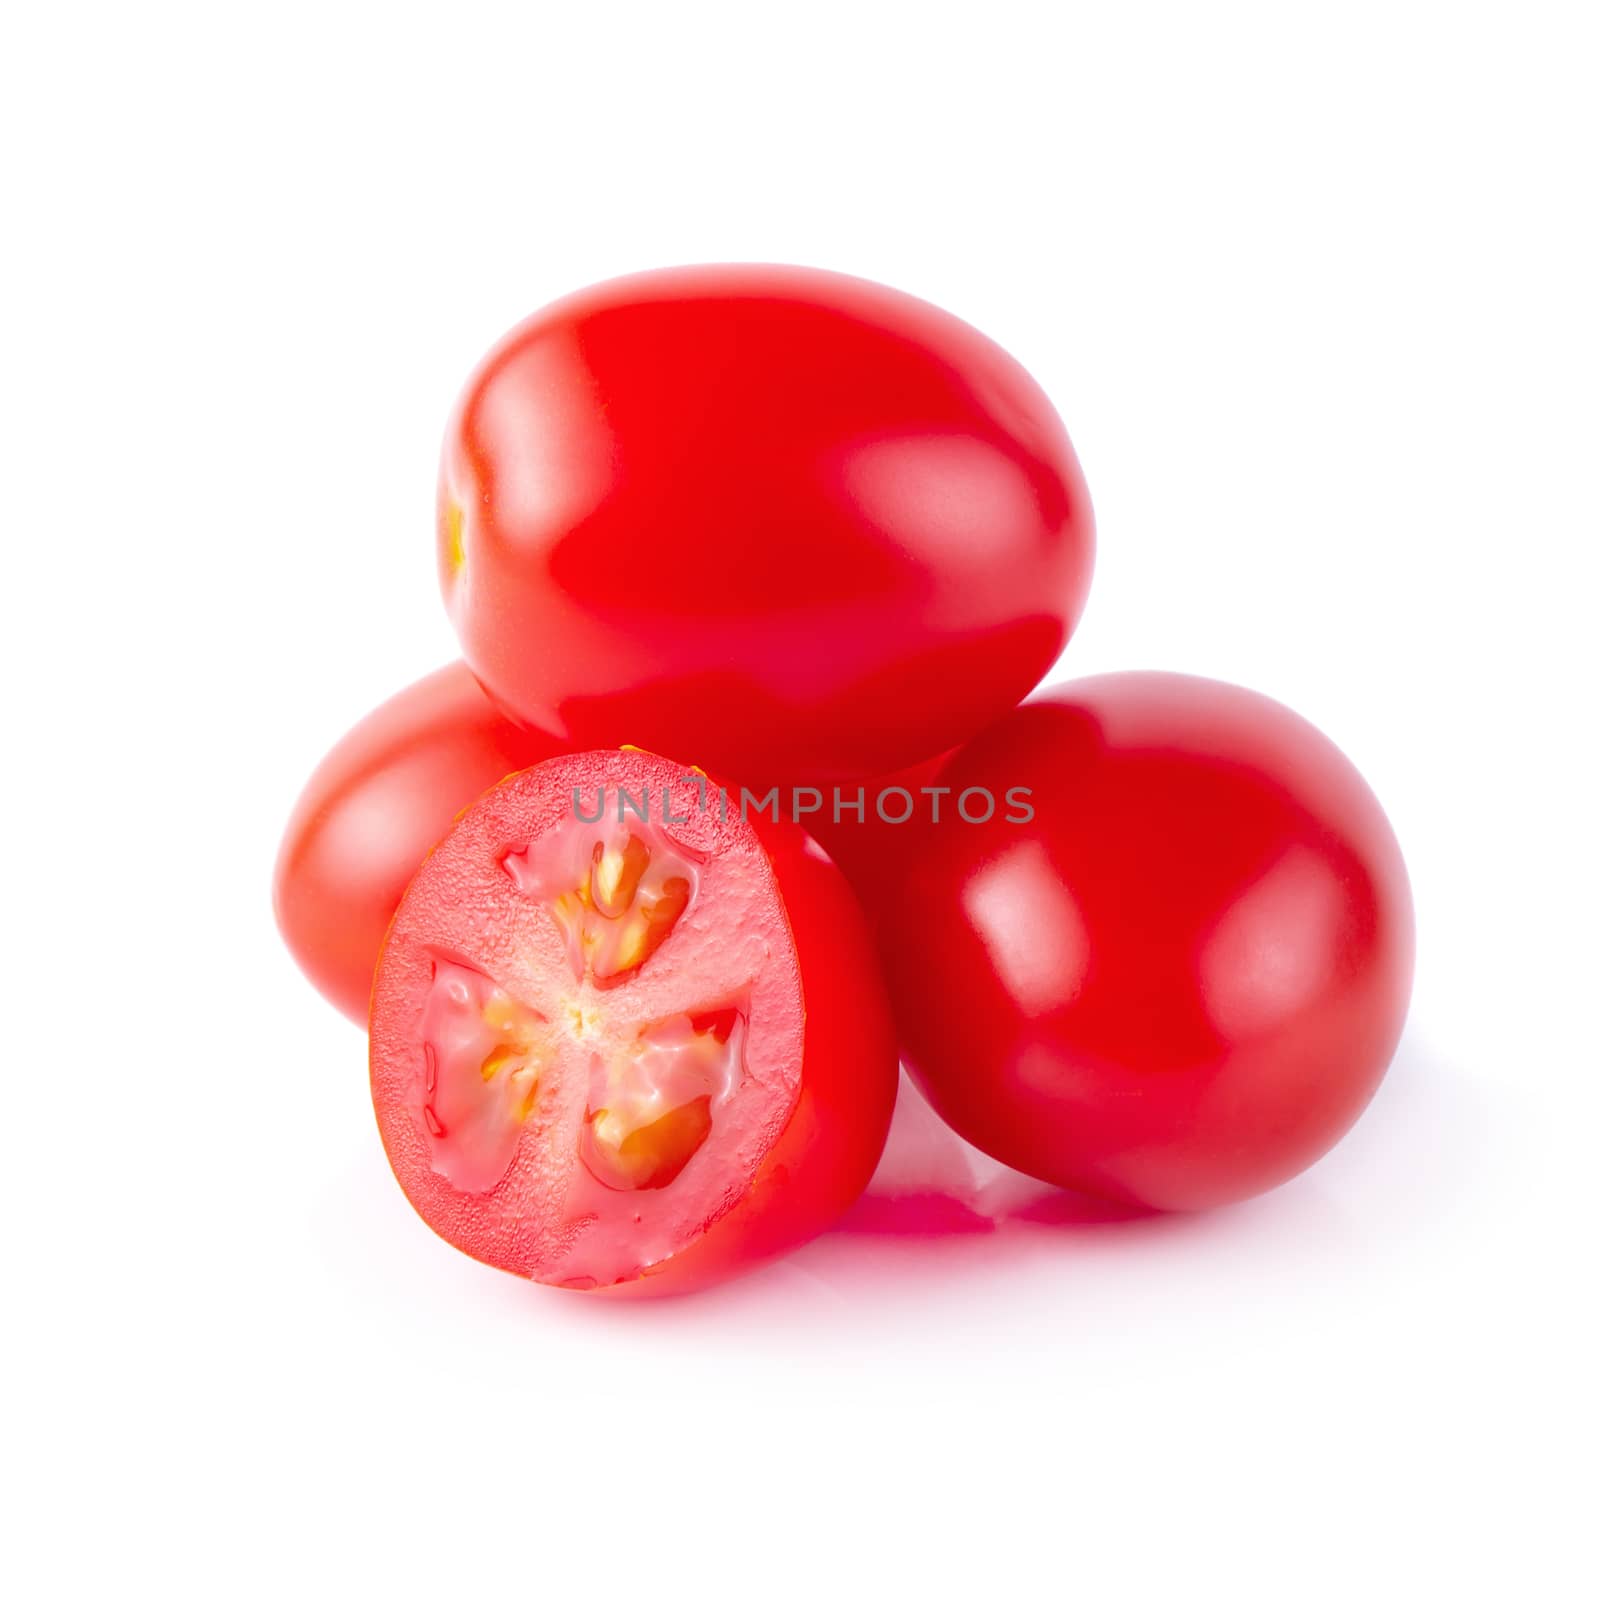 Red ripe tomatoes isolated over white background by kaiskynet